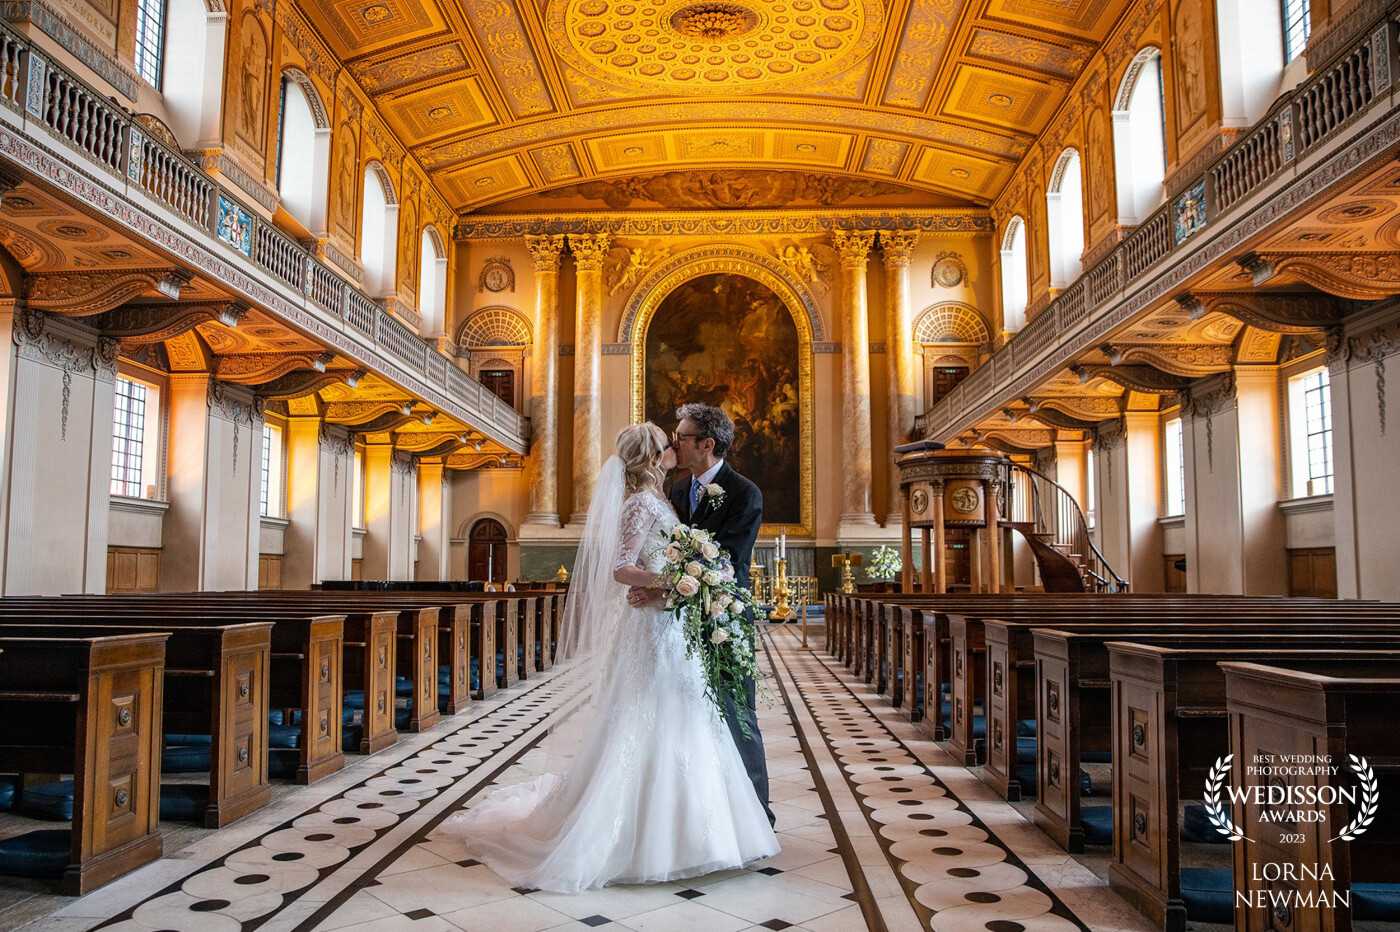 Annie & Geoff got married in the beautiful Old Royal Naval College in Greenwich London, which is just stunning. We had to take a moment to capture this shot and take advantage of the amazing surroundings inside the chapel before we left.<br />
<br />
You might recognise the location ? This is where four weddings and a funeral & Bridgeton was filmed....